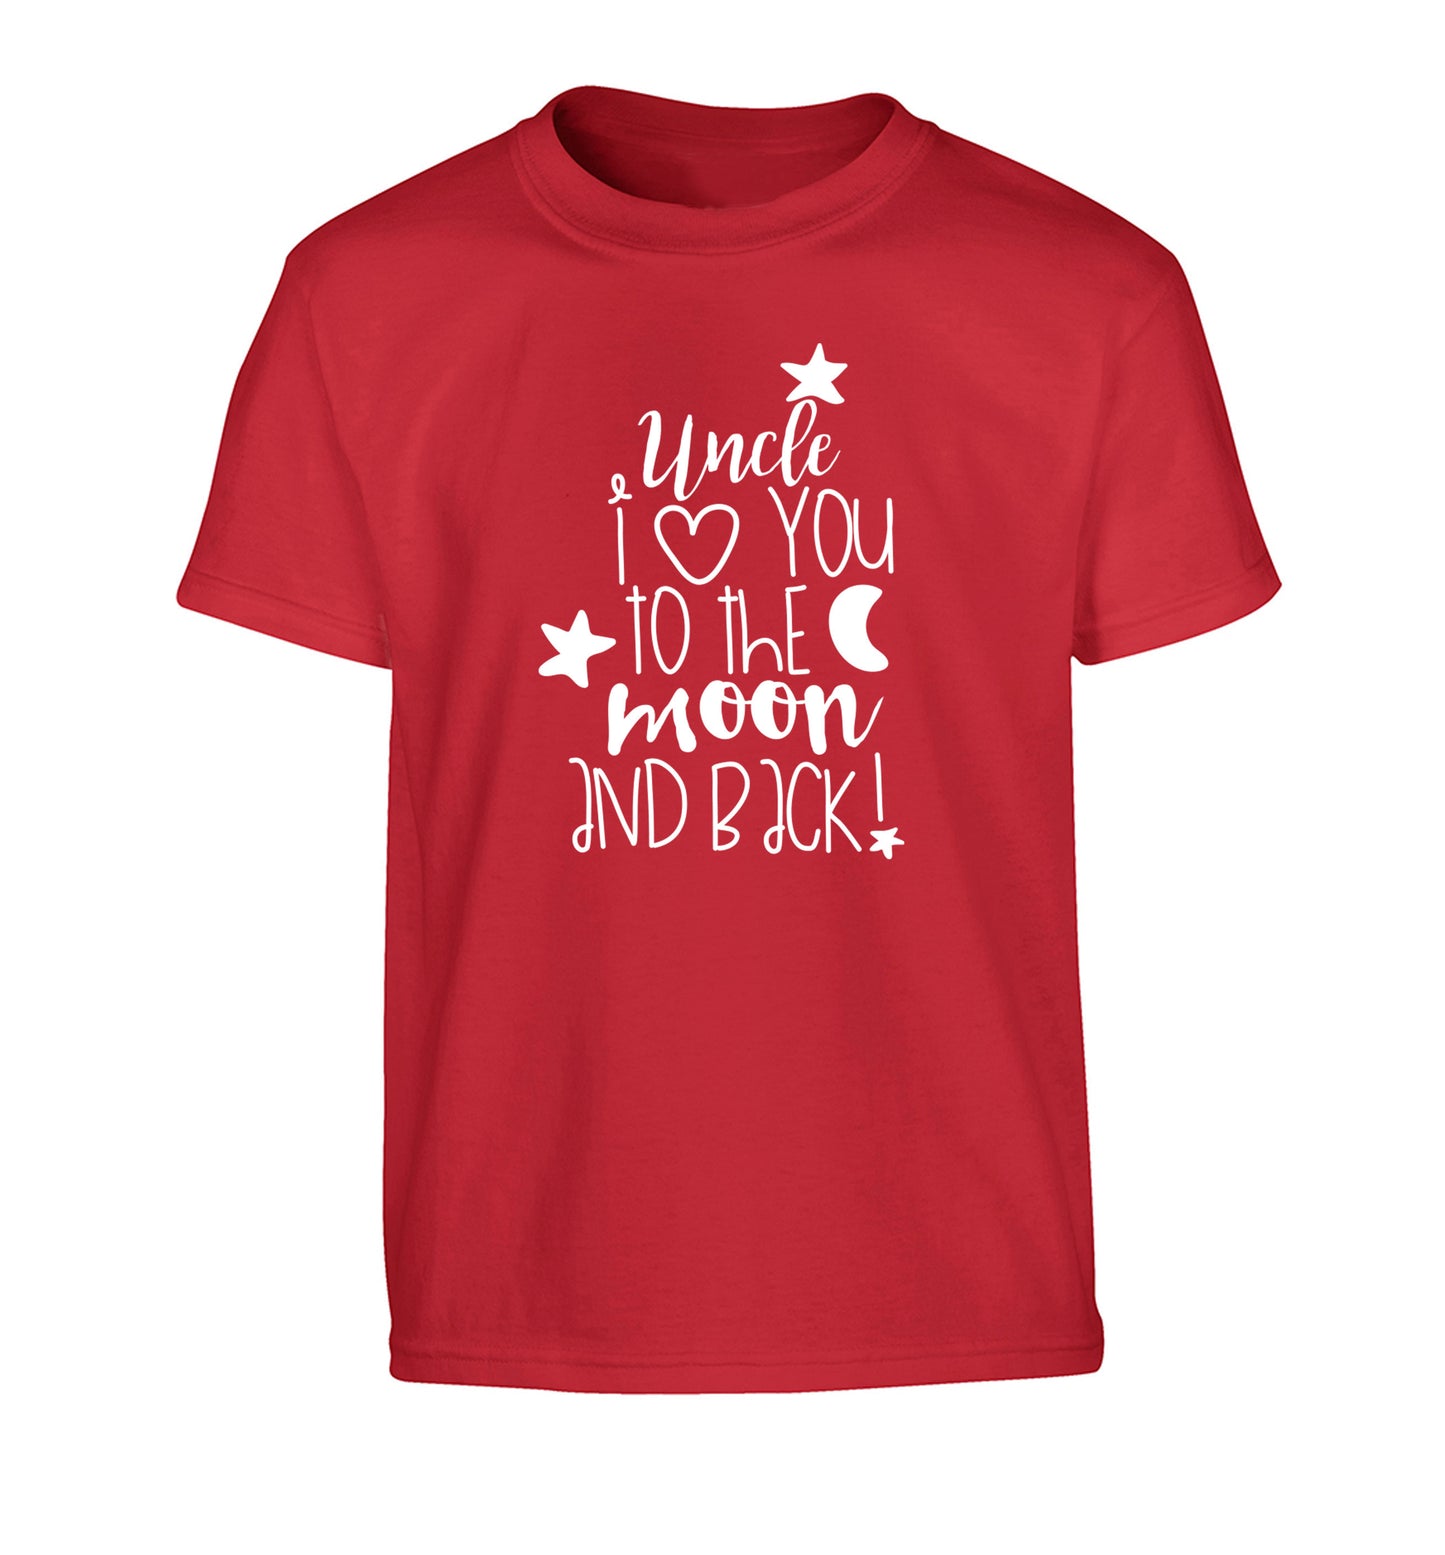 Uncle I love you to the moon and back Children's red Tshirt 12-14 Years